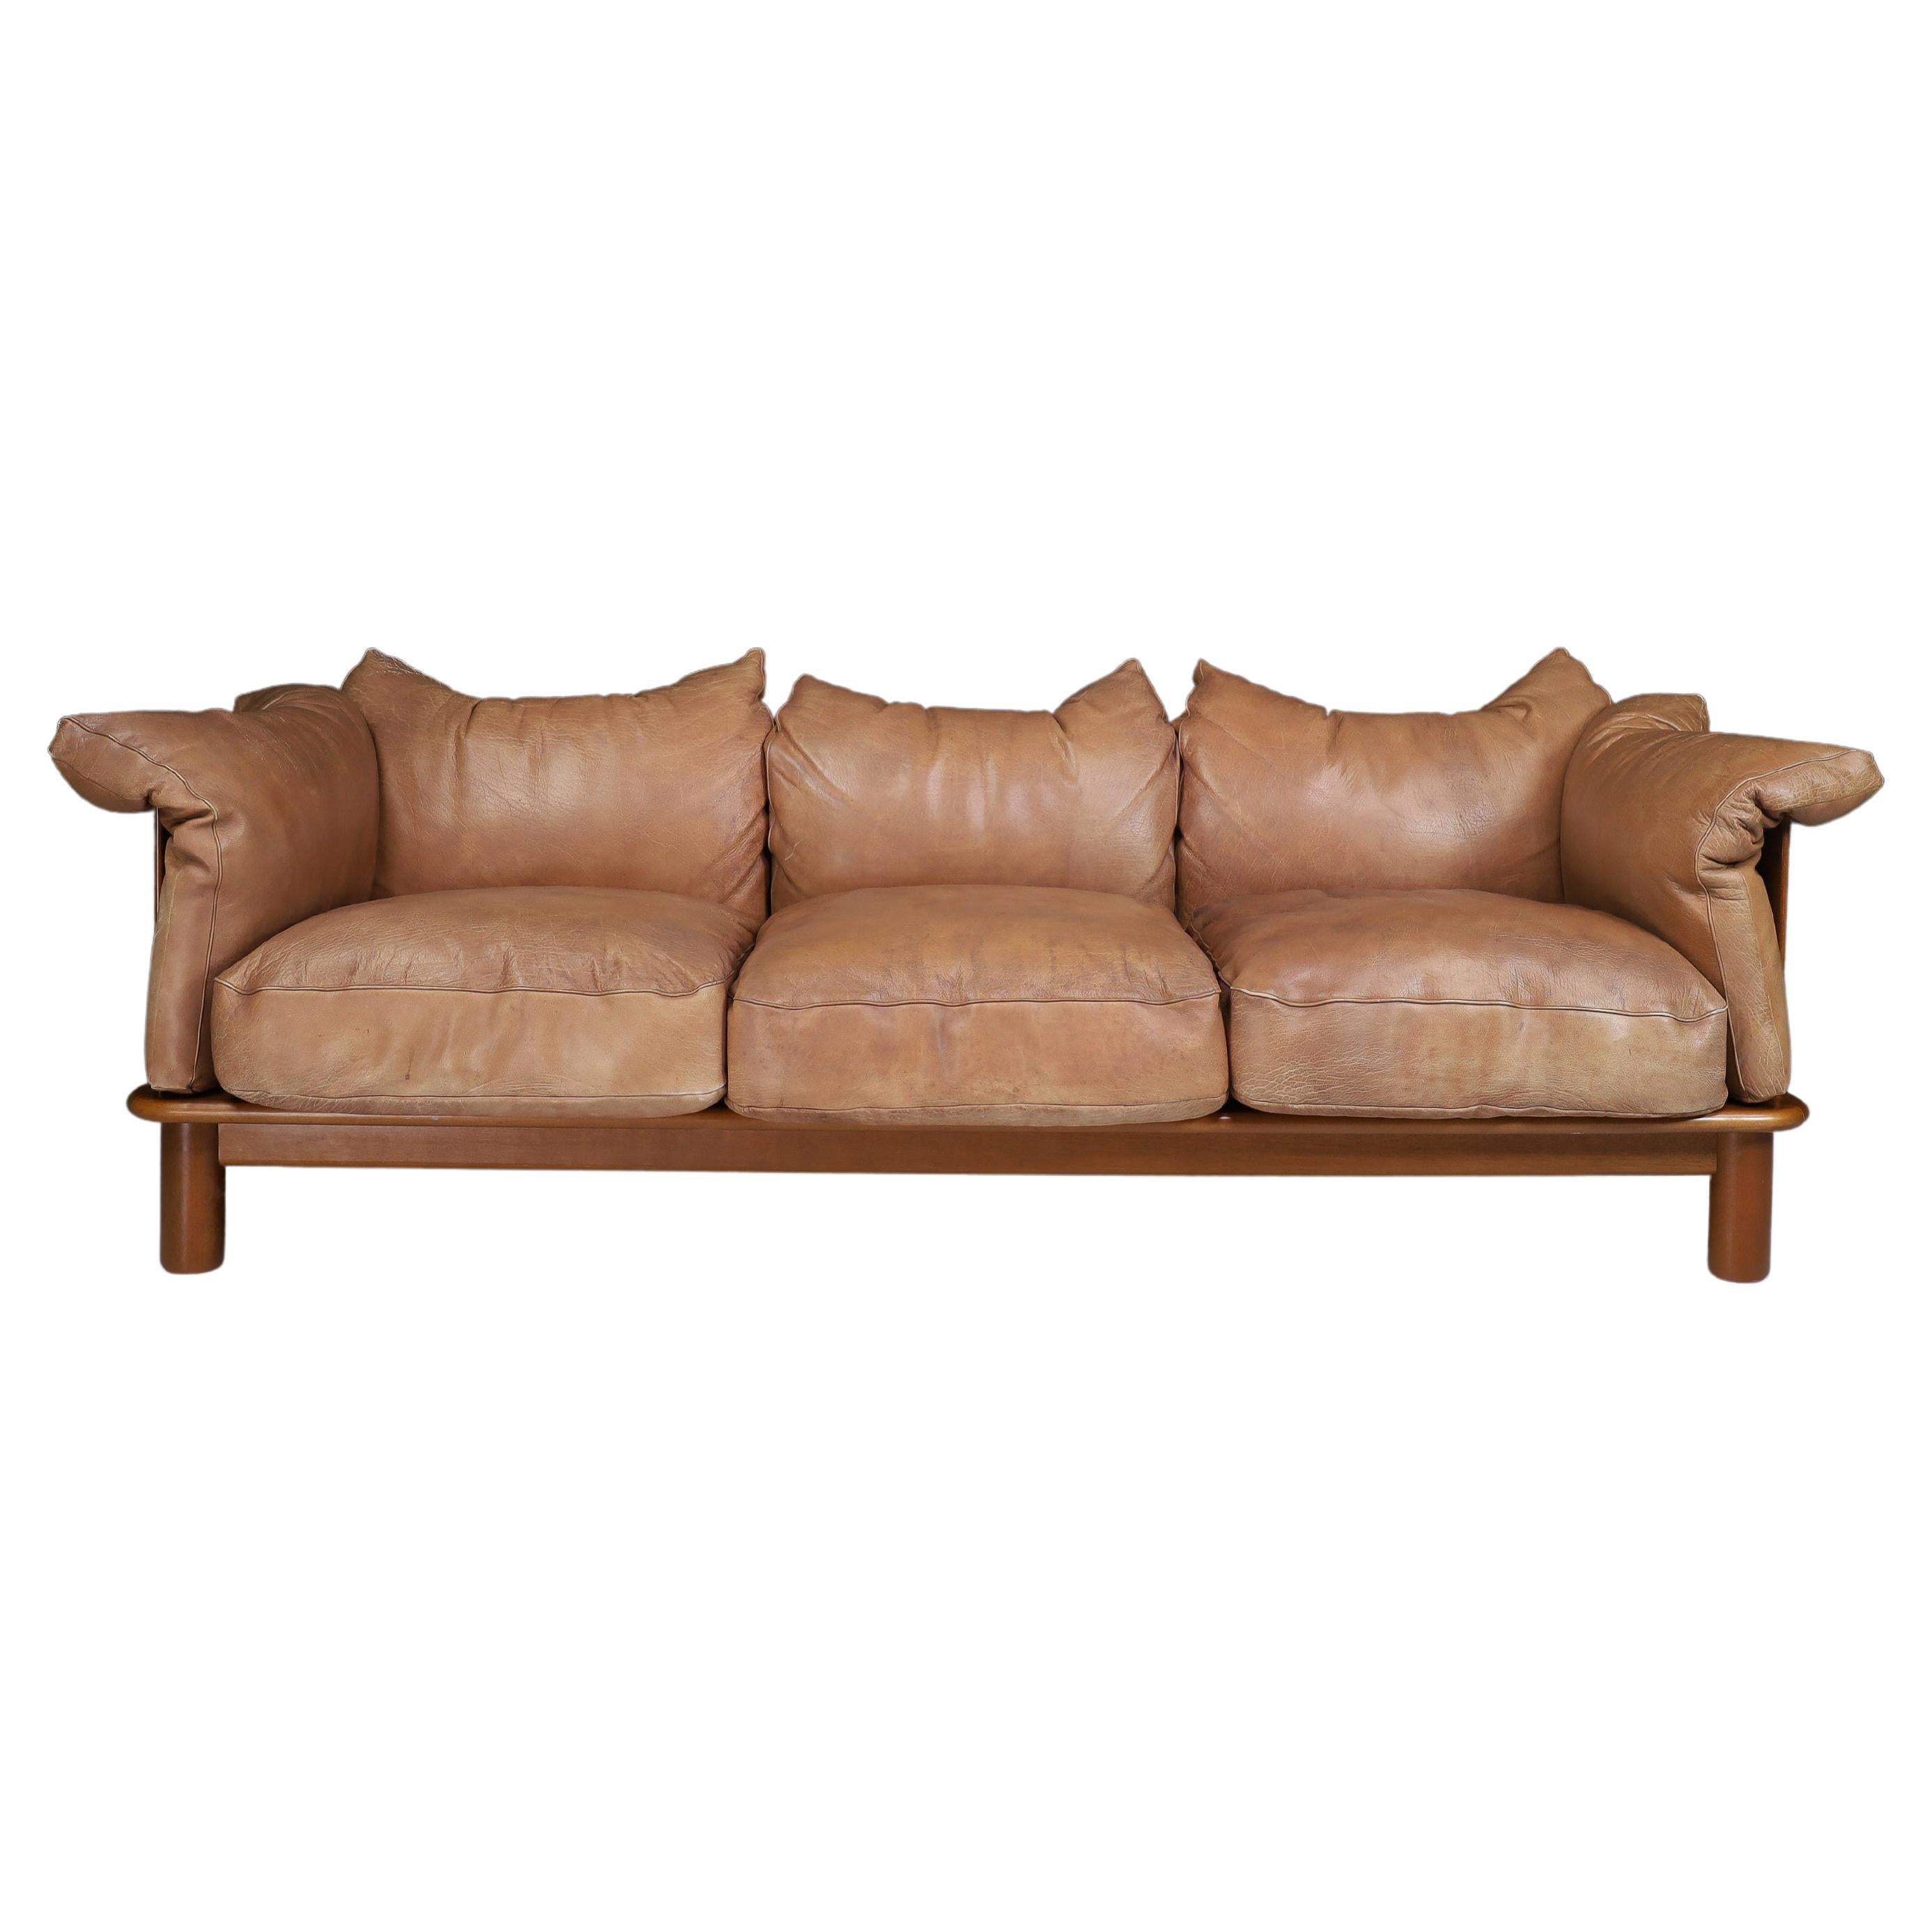 Brown Leather and Walnut XL Sofa from De Pas, D'Urbino Lomazzi for Padova, Italy